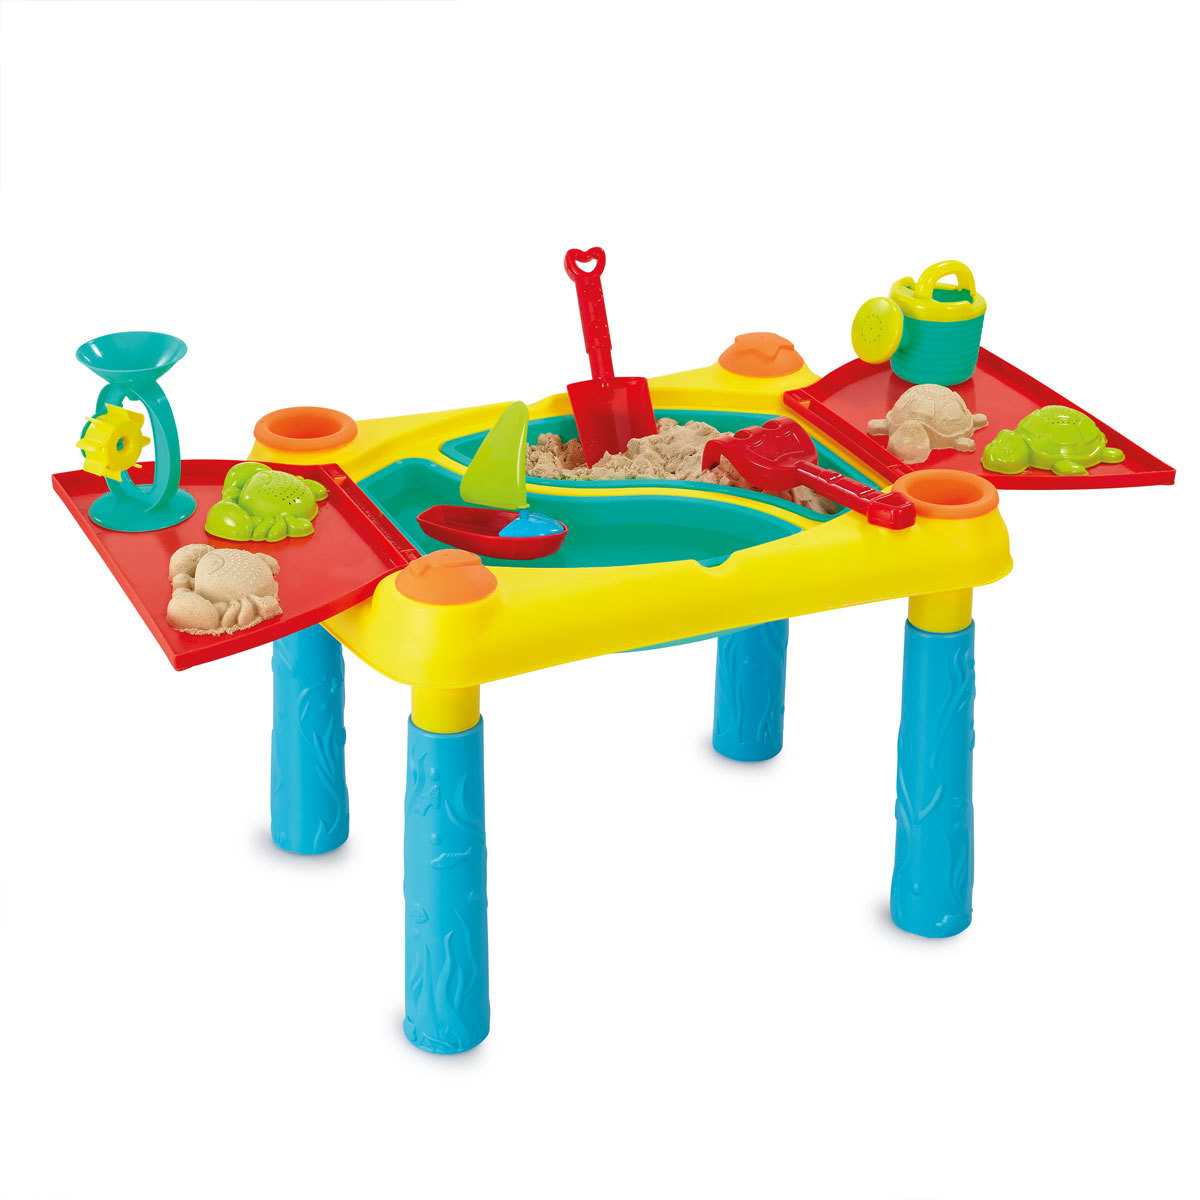  Out and About Deluxe Sand and Water Activity Table